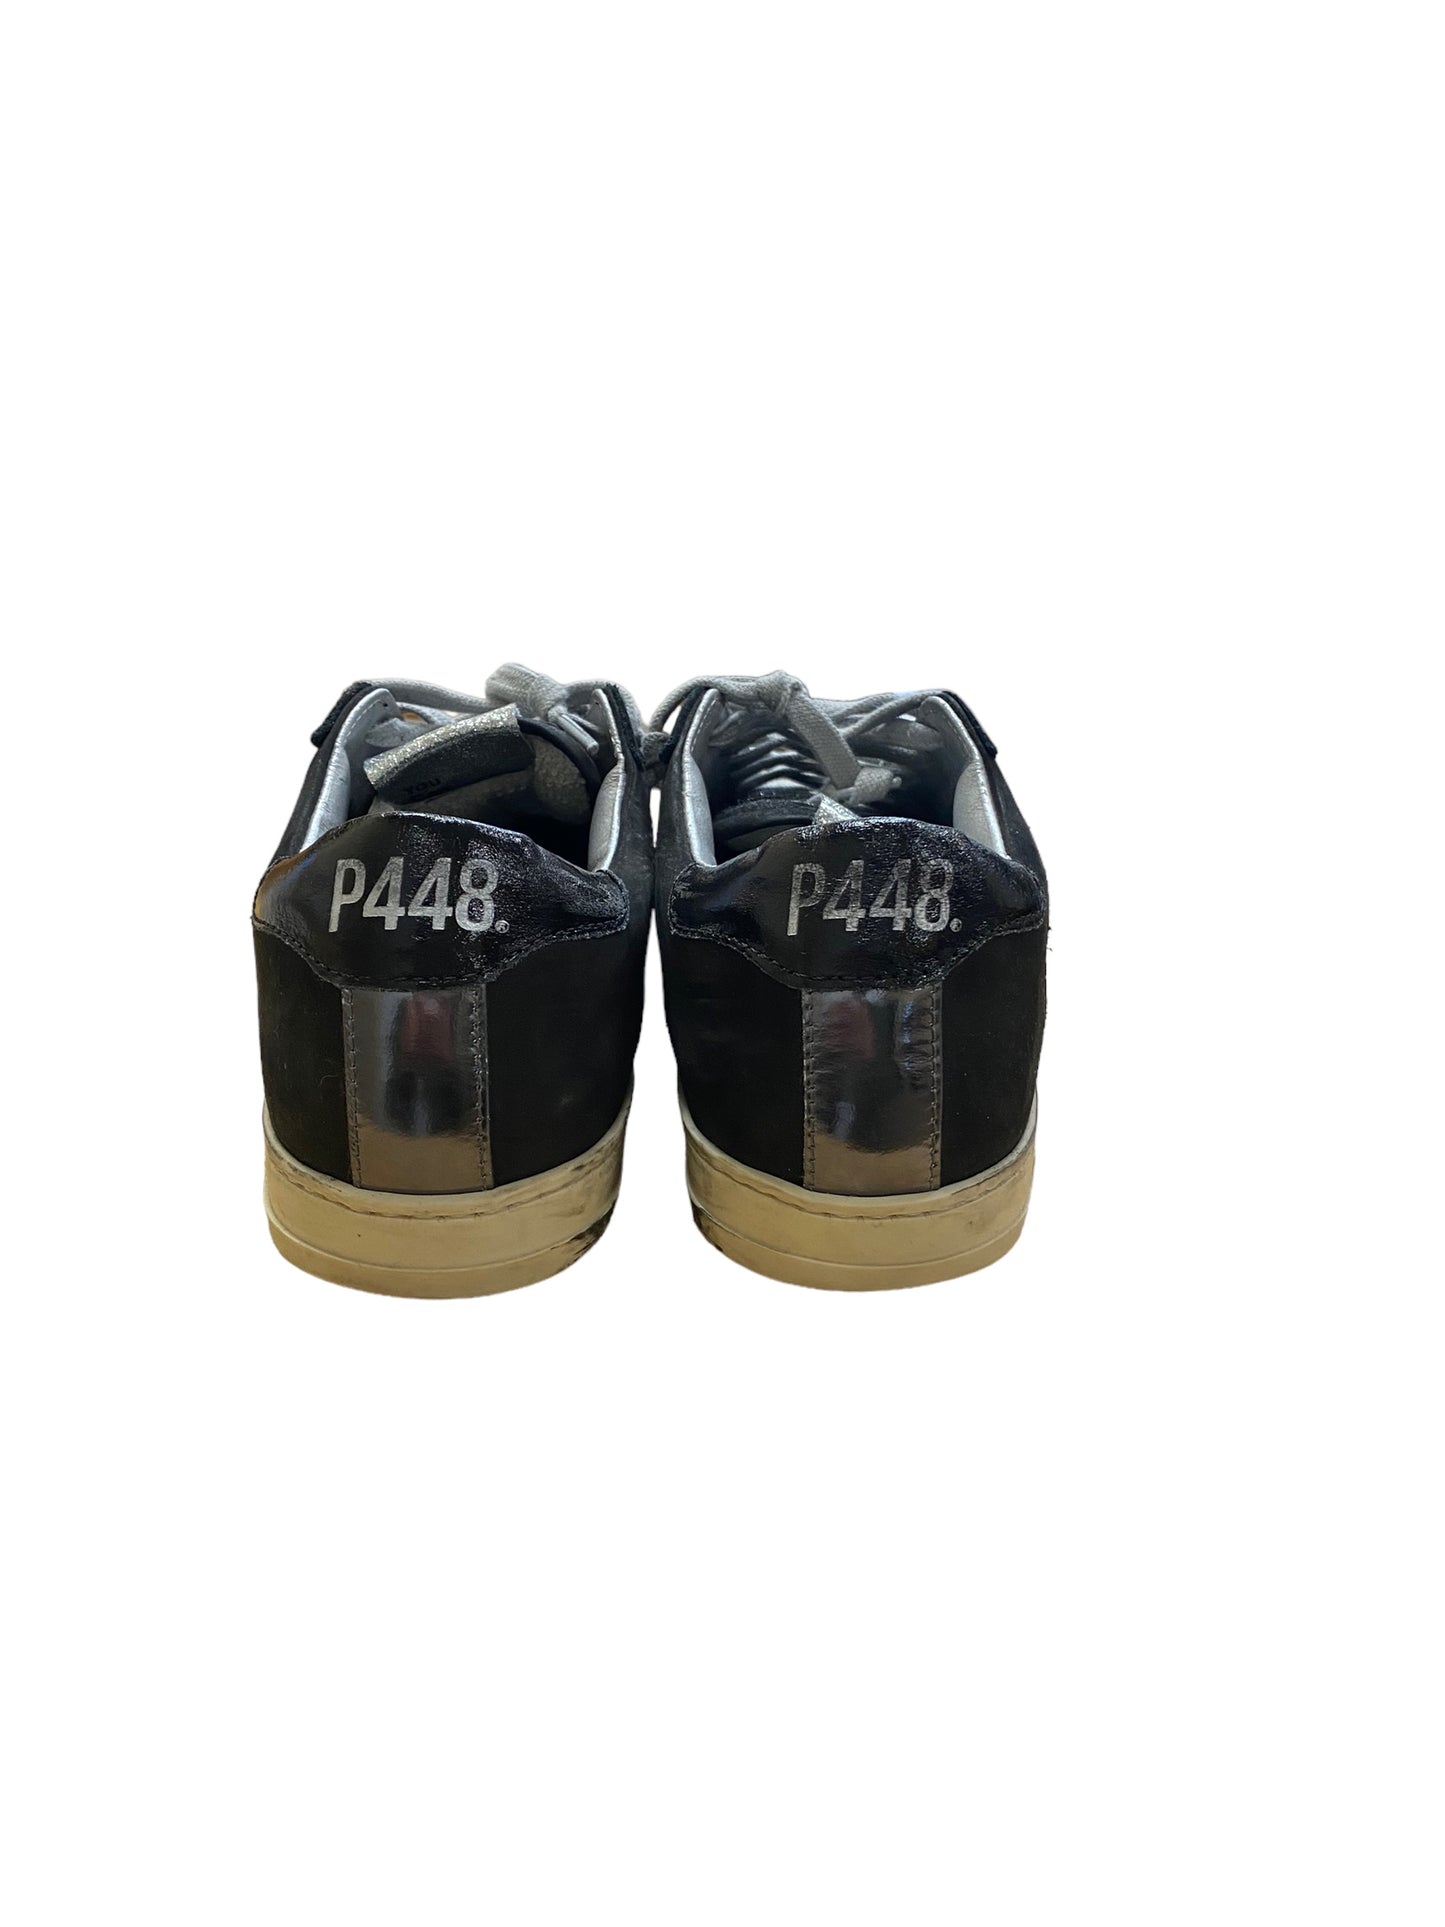 Shoes Sneakers By P448  Size: 6.5